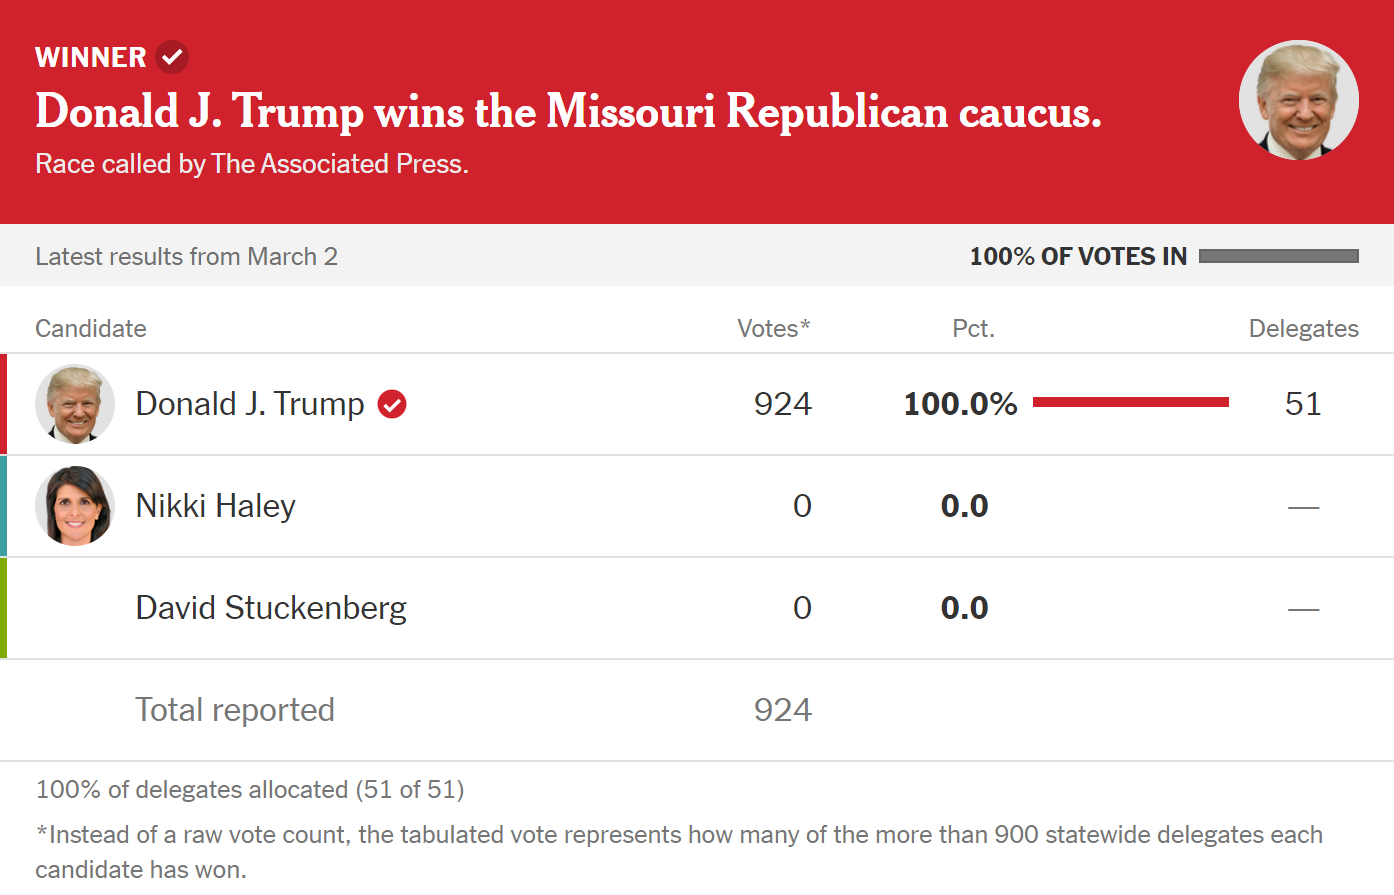 Donald Trump won the Republican Party caucuses in Missouri and Idaho by significant margins, while Nikki Haley won her first primary in Washington DC.